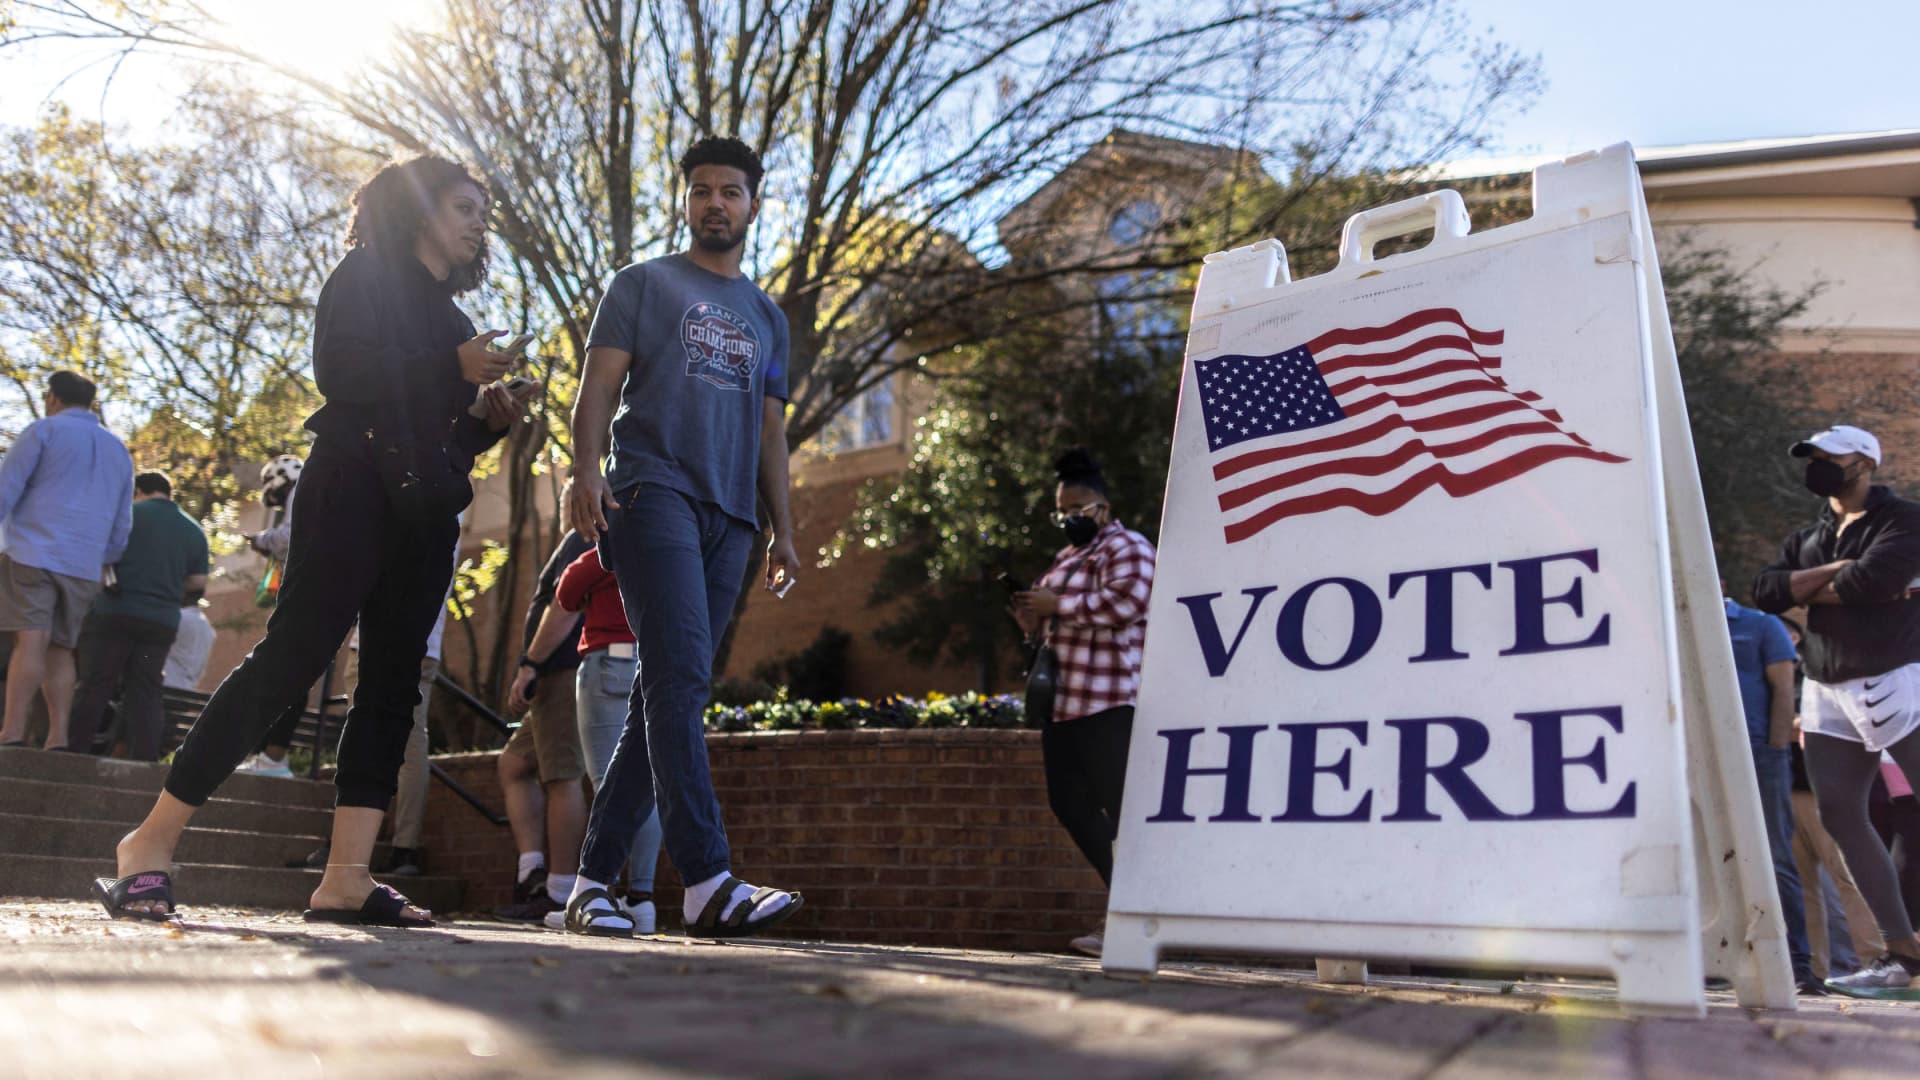 A couple leave after casting their ballots during early voting for the midterm elections at the Smyrna Community Center in Smyrna, Georgia, November 4, 2022.